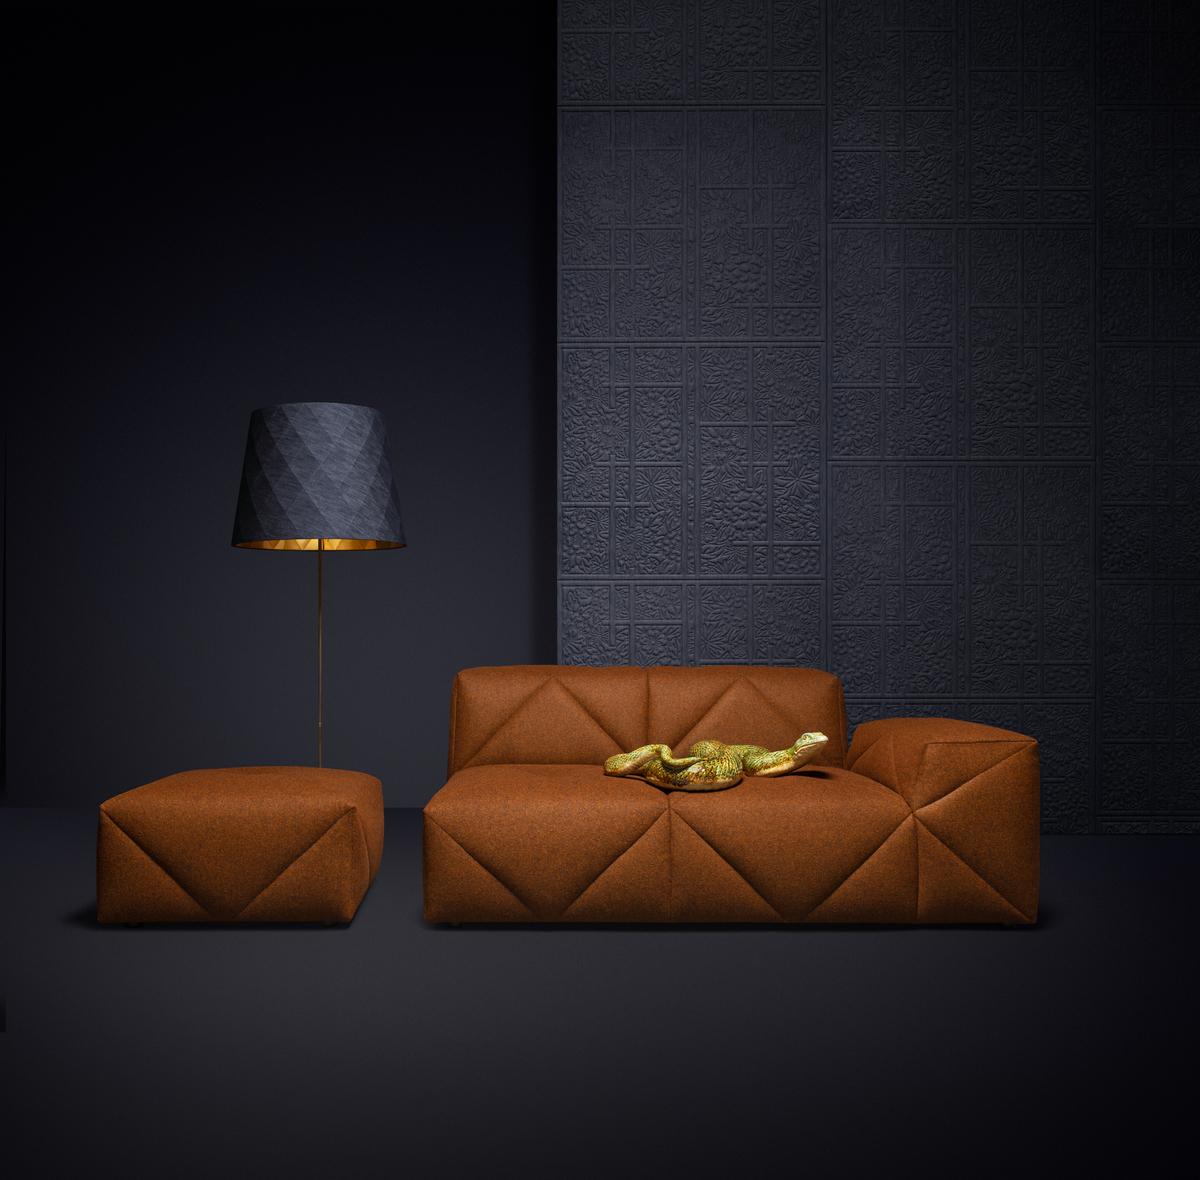 The award-winning BFF Sofa by Marcel Wanders is everyone's new best friend! A high quality, soft yet firm modular sofa system, consisting of a wide variety of modules for endless configurations. BFF Footstool is available in more than 325 fabrics.